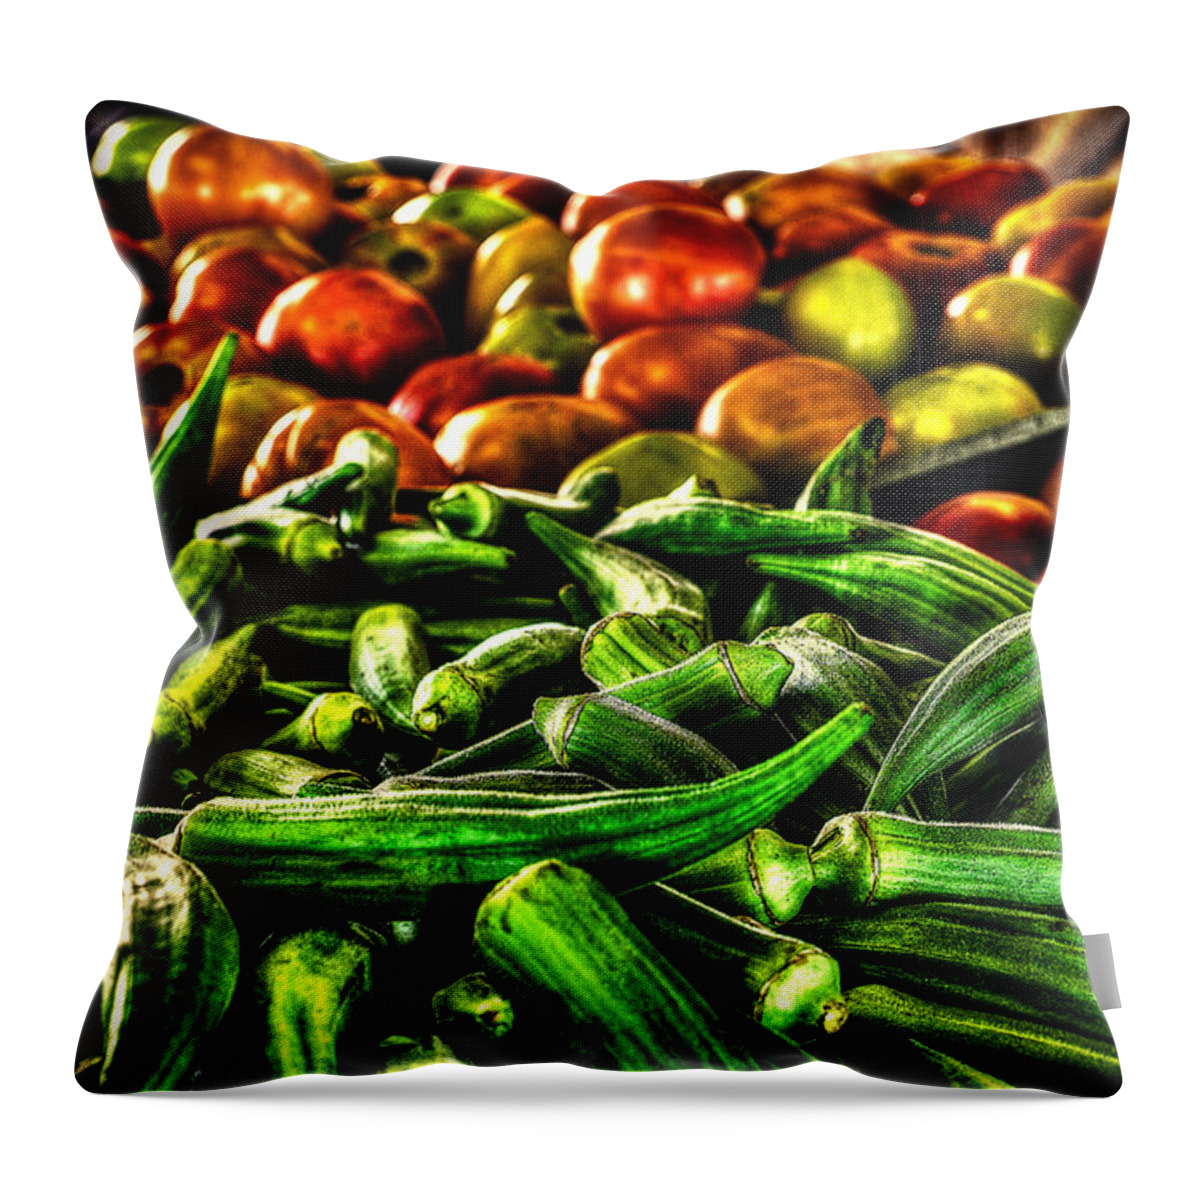 Okra Throw Pillow featuring the photograph Okra and Tomatoes by David Morefield